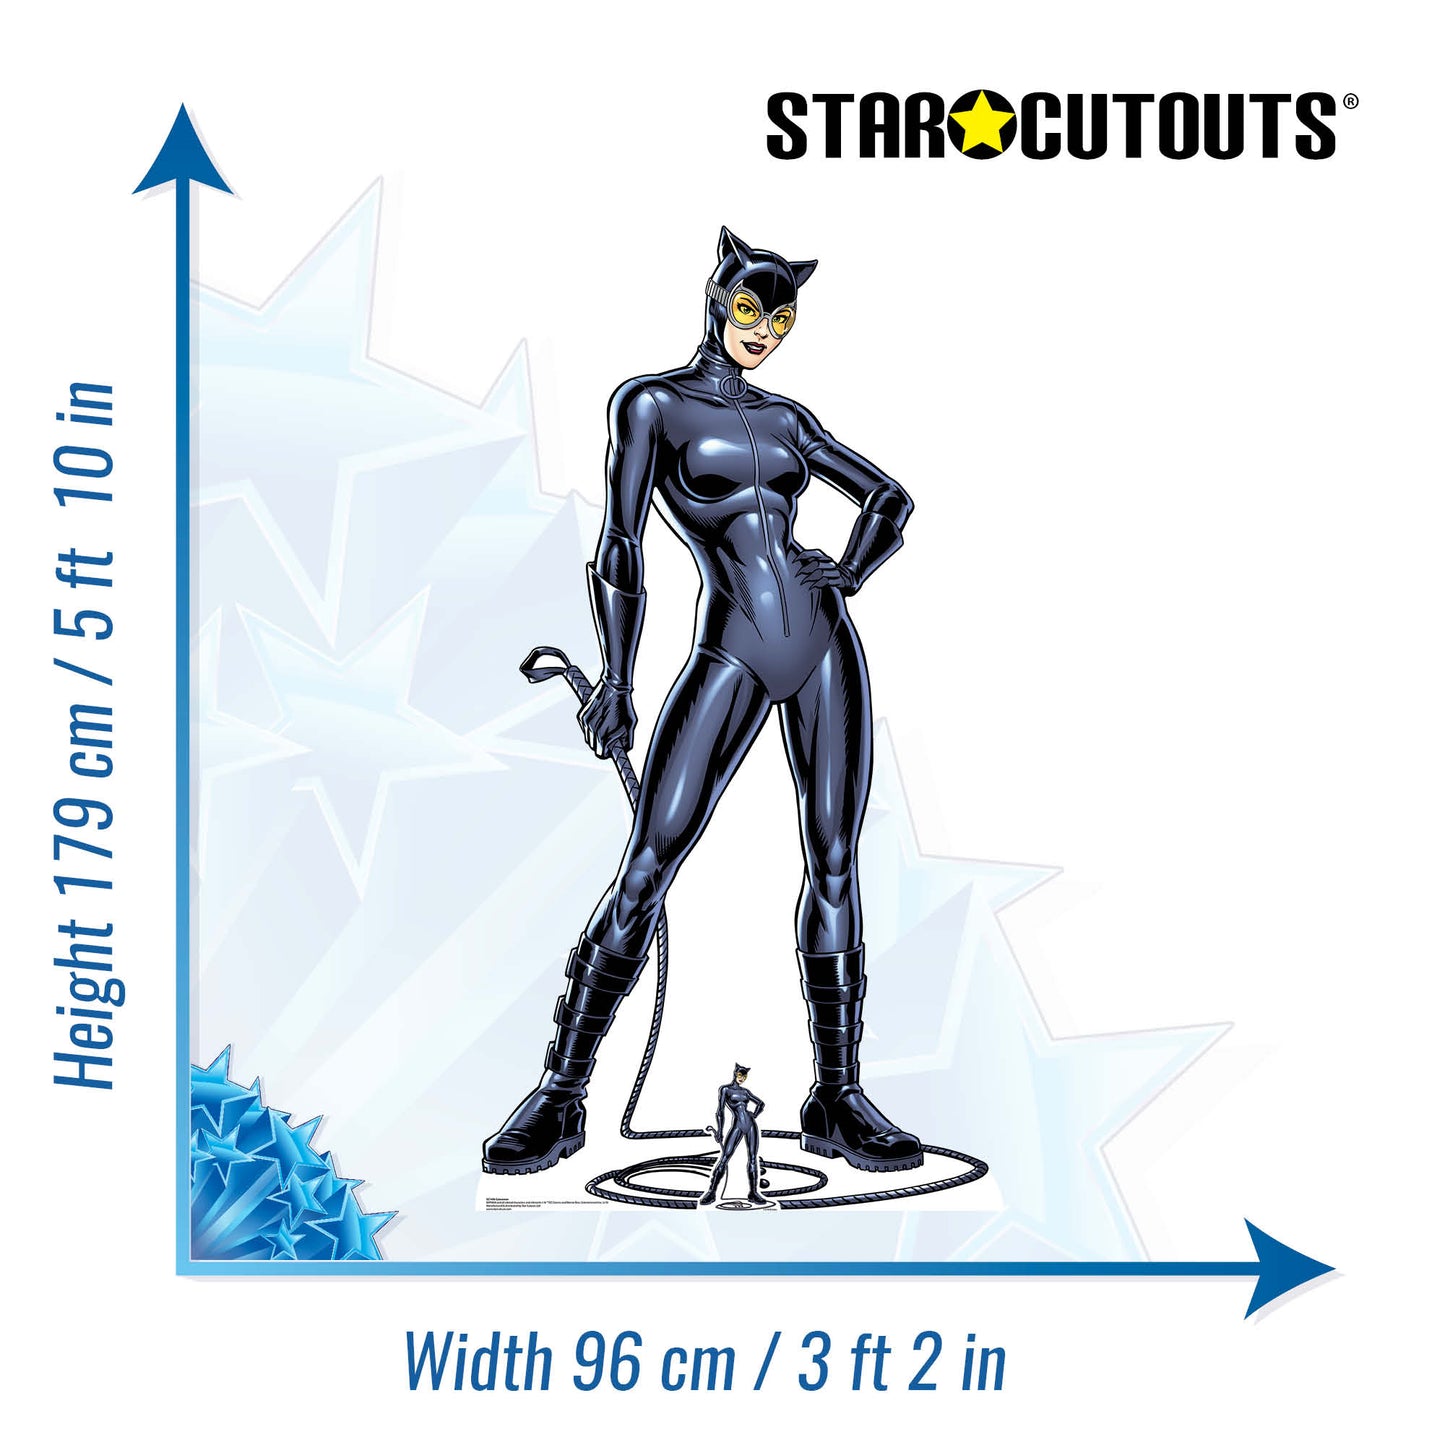 Catwoman with Whip Graphic Artwork Cardboard Cutout